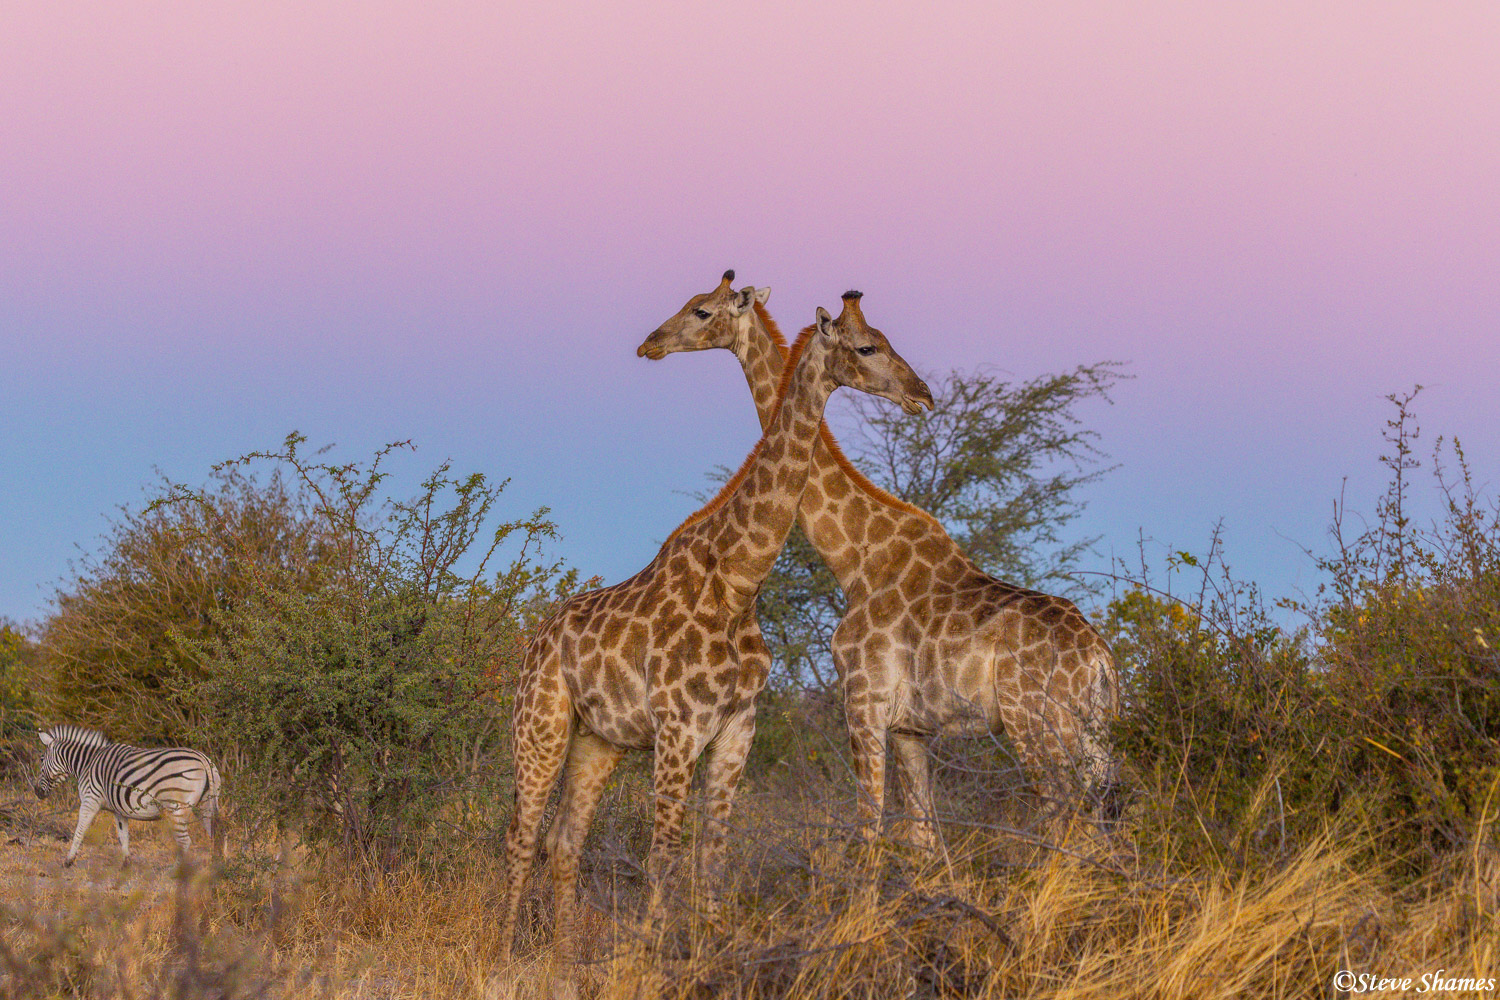 Giraffes in the beautiful twilight, right after sunset.